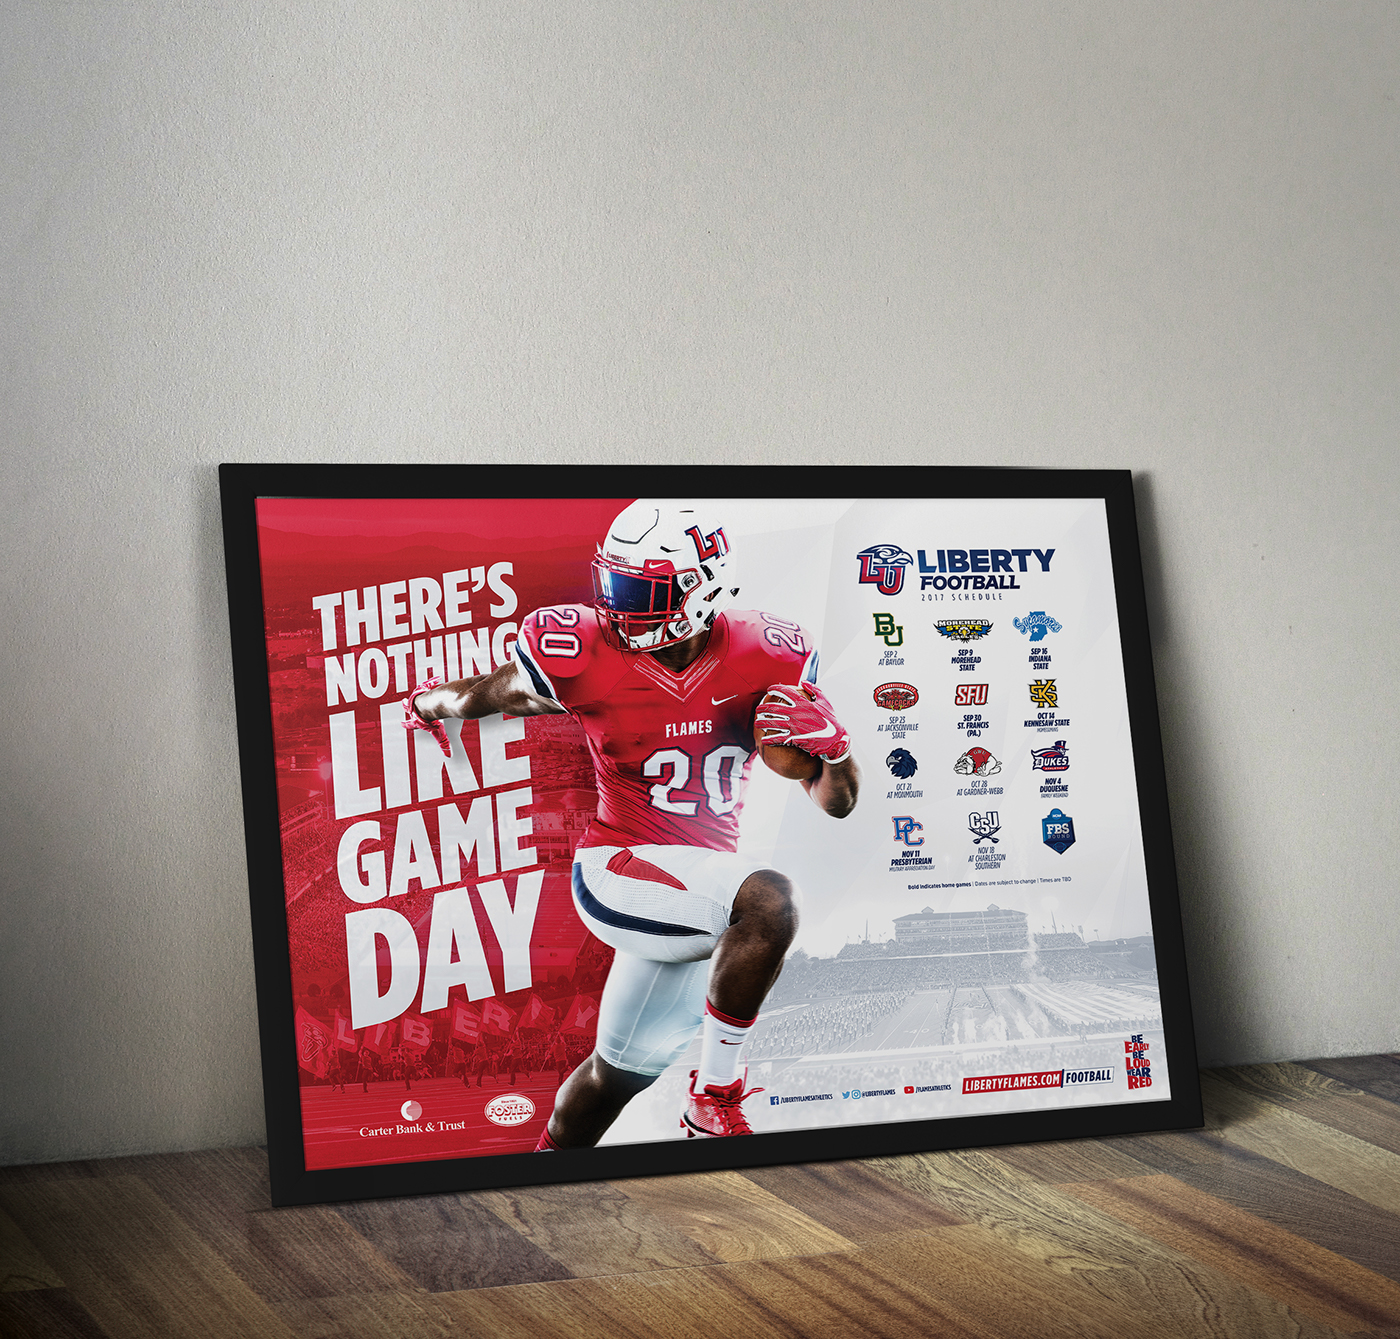 sport football nfl Liberty NCAA logo campaign poster banner college